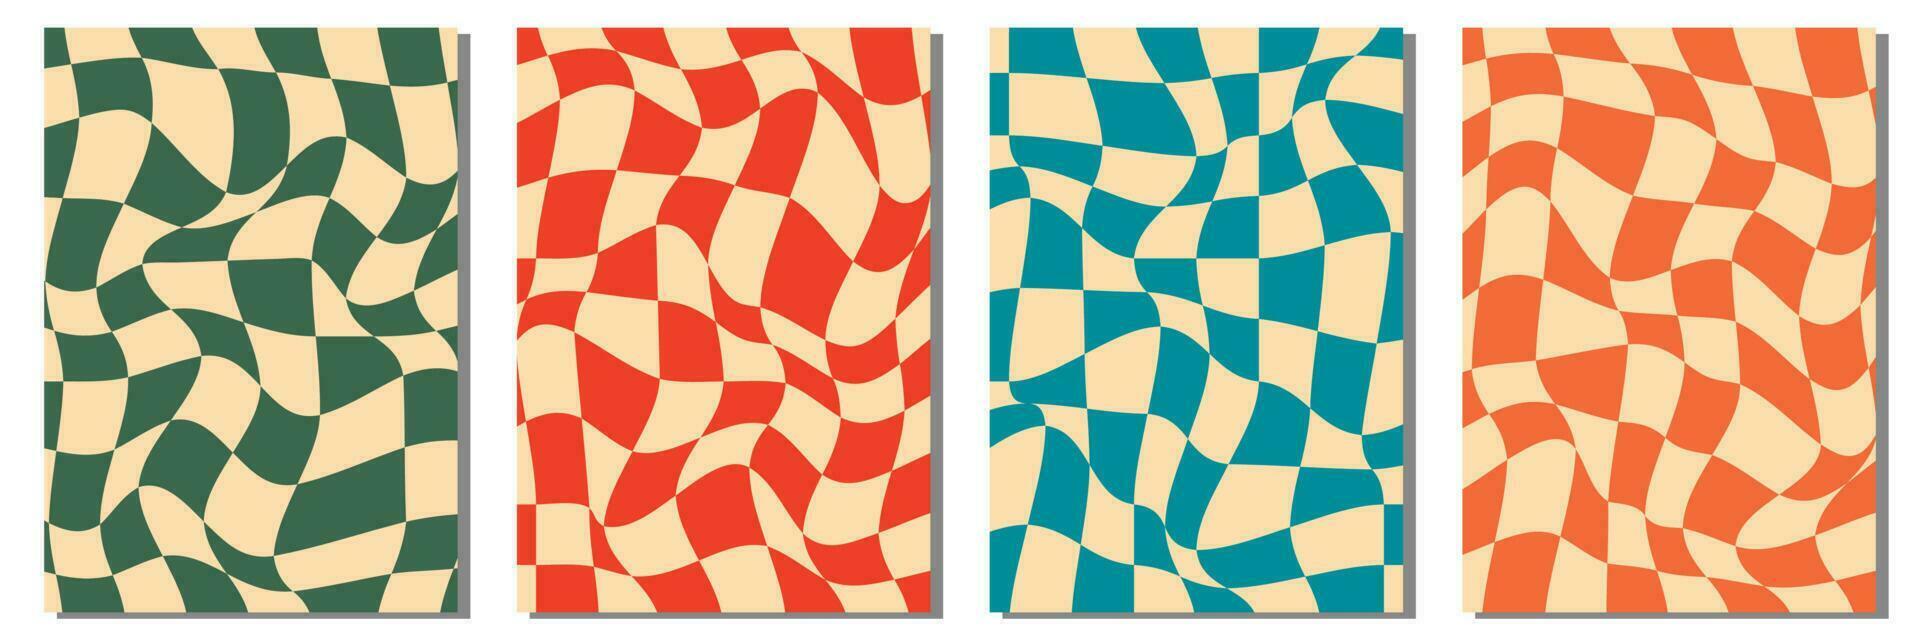 Chessboard retro 60s 70s 90s texture vector abstract geometric square background blue, red and green or yellow wallpaper vintage illustration set.